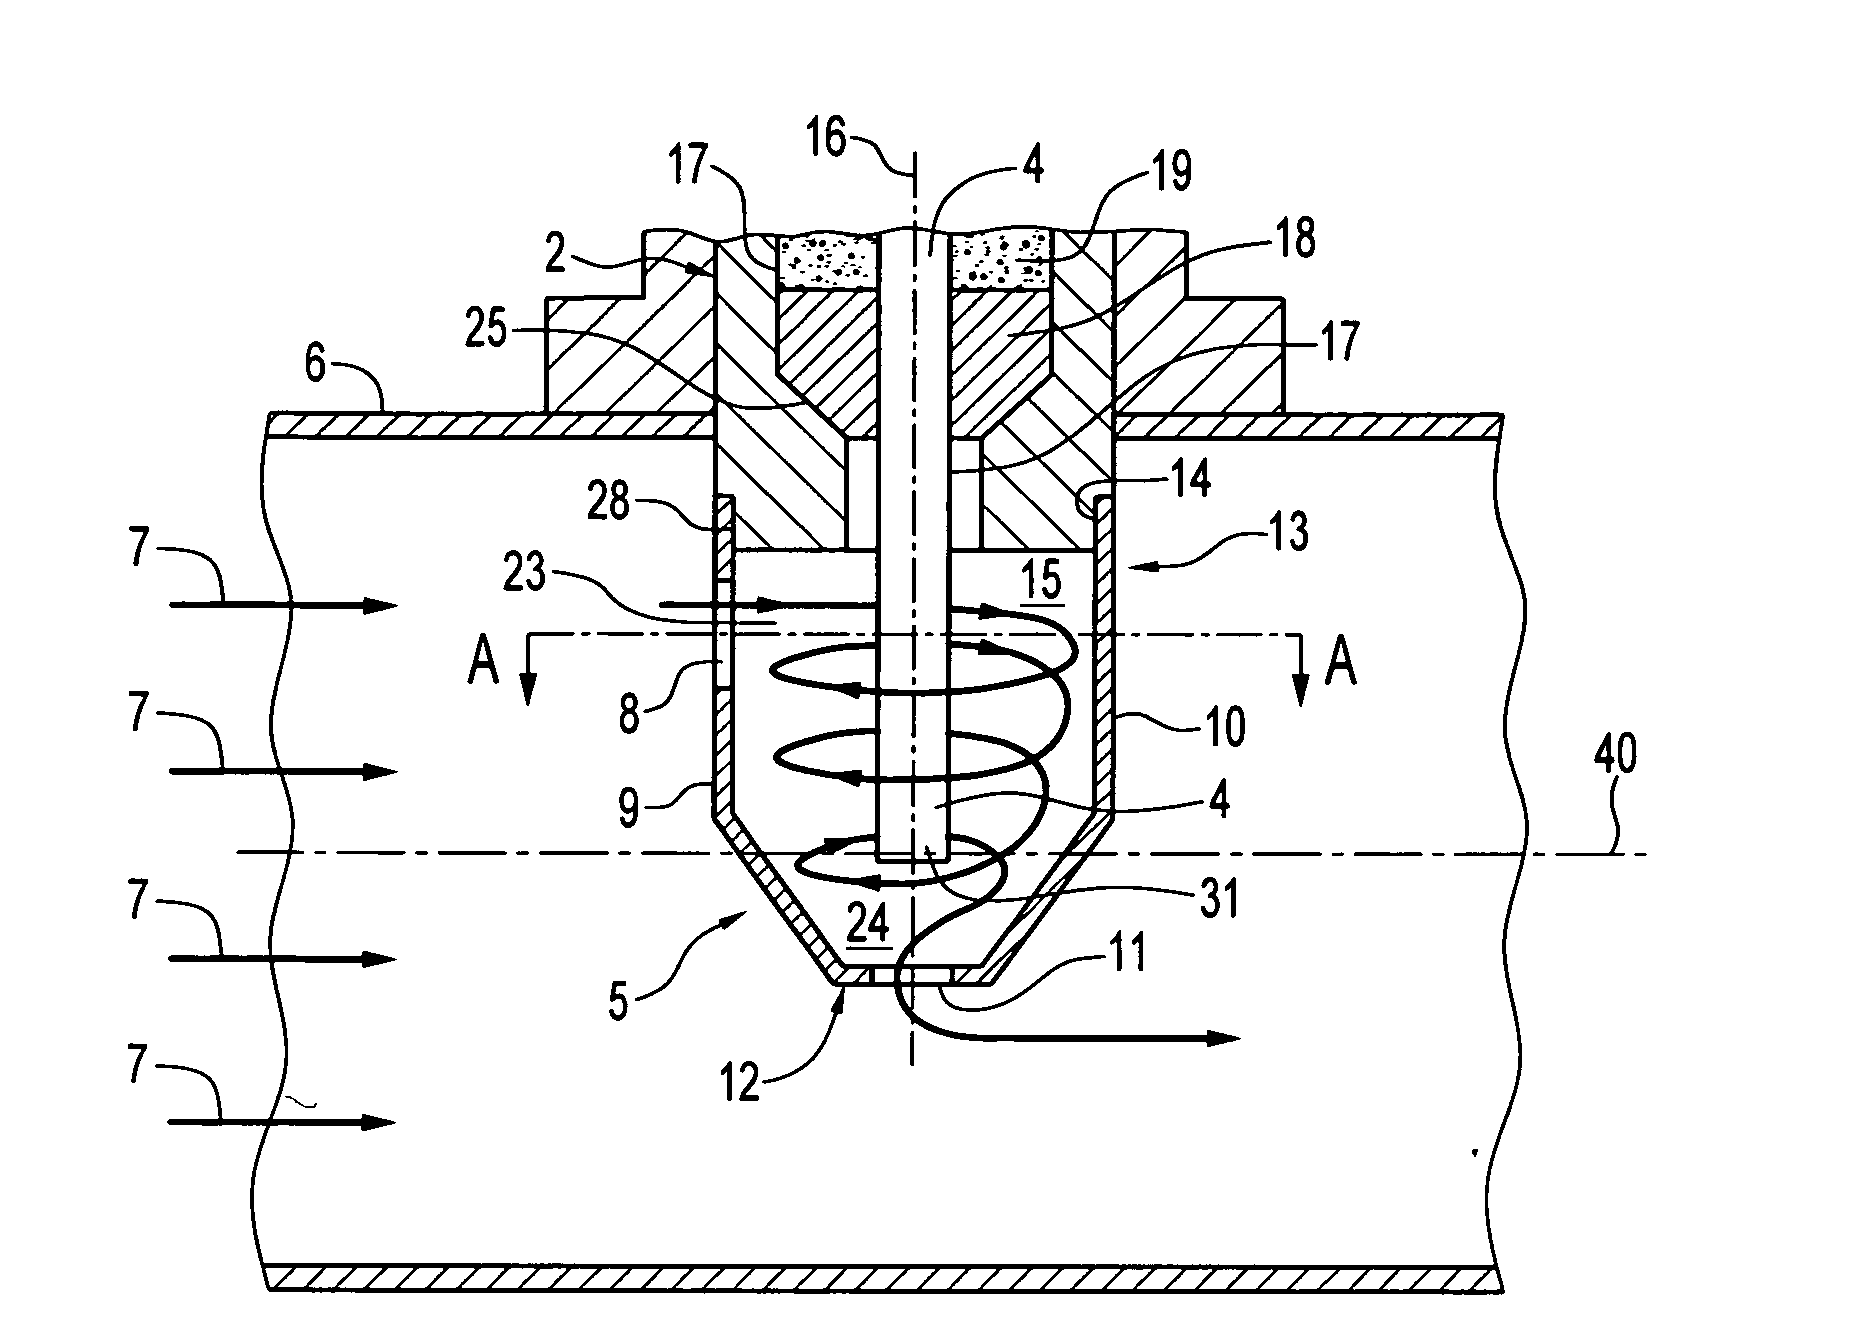 Gas sensor packaging for elevated temperature and harsh environment and related methods